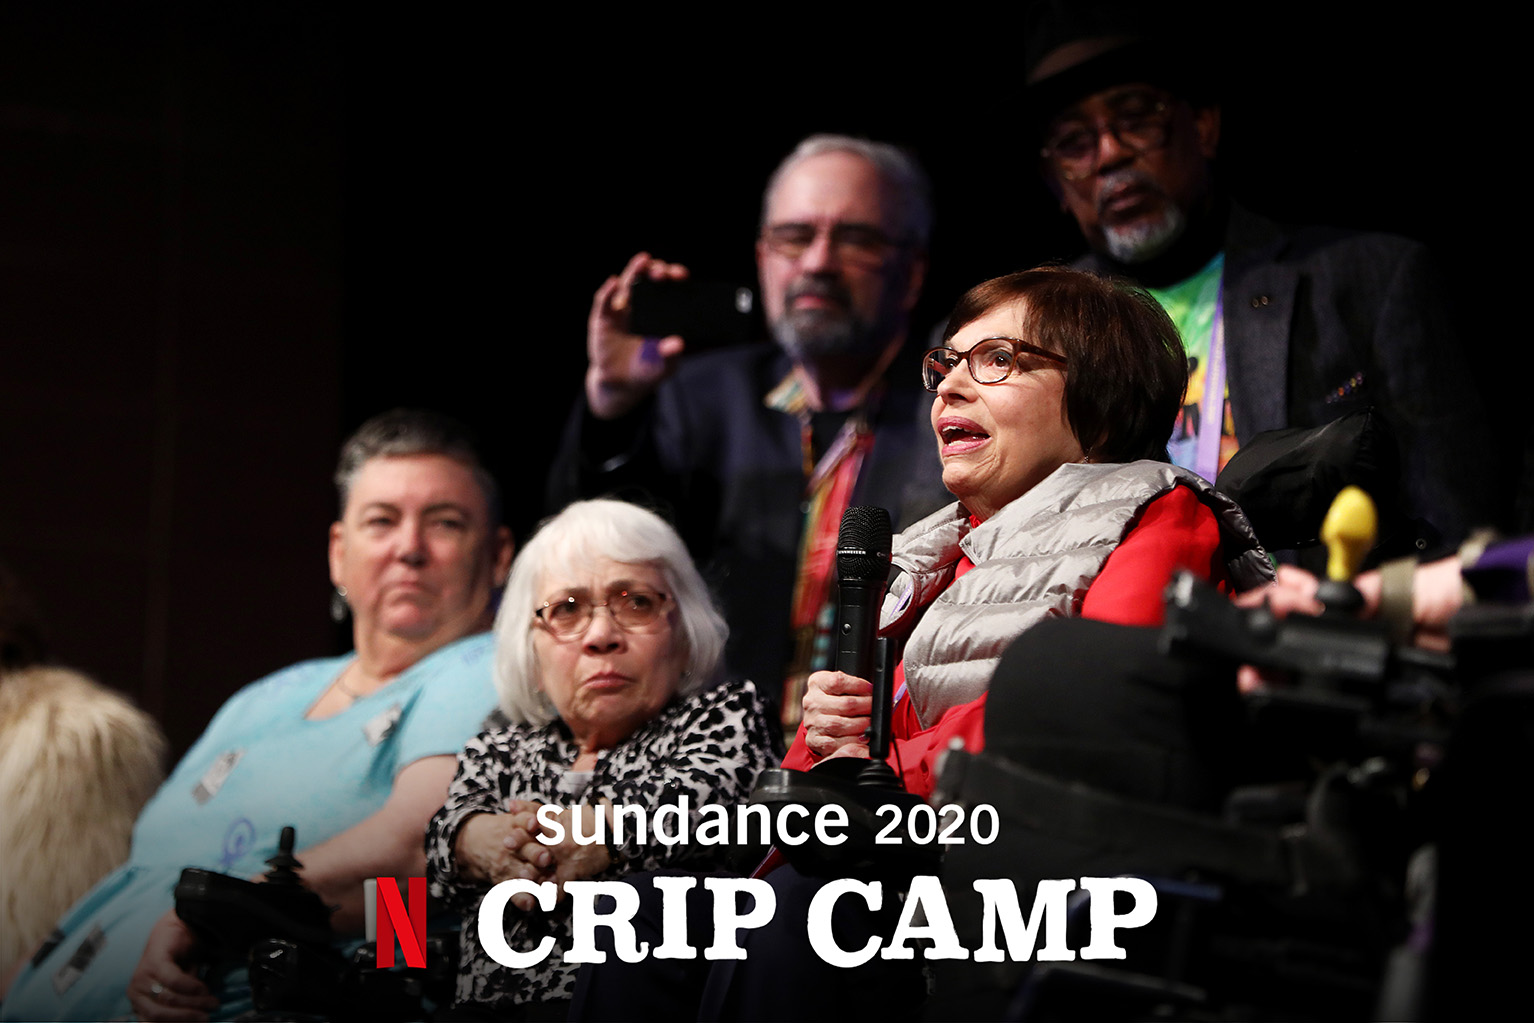 Judy on stage holding a microphone. White text reads "Sundance 2020 Crip Camp" with the Netflix Logo.